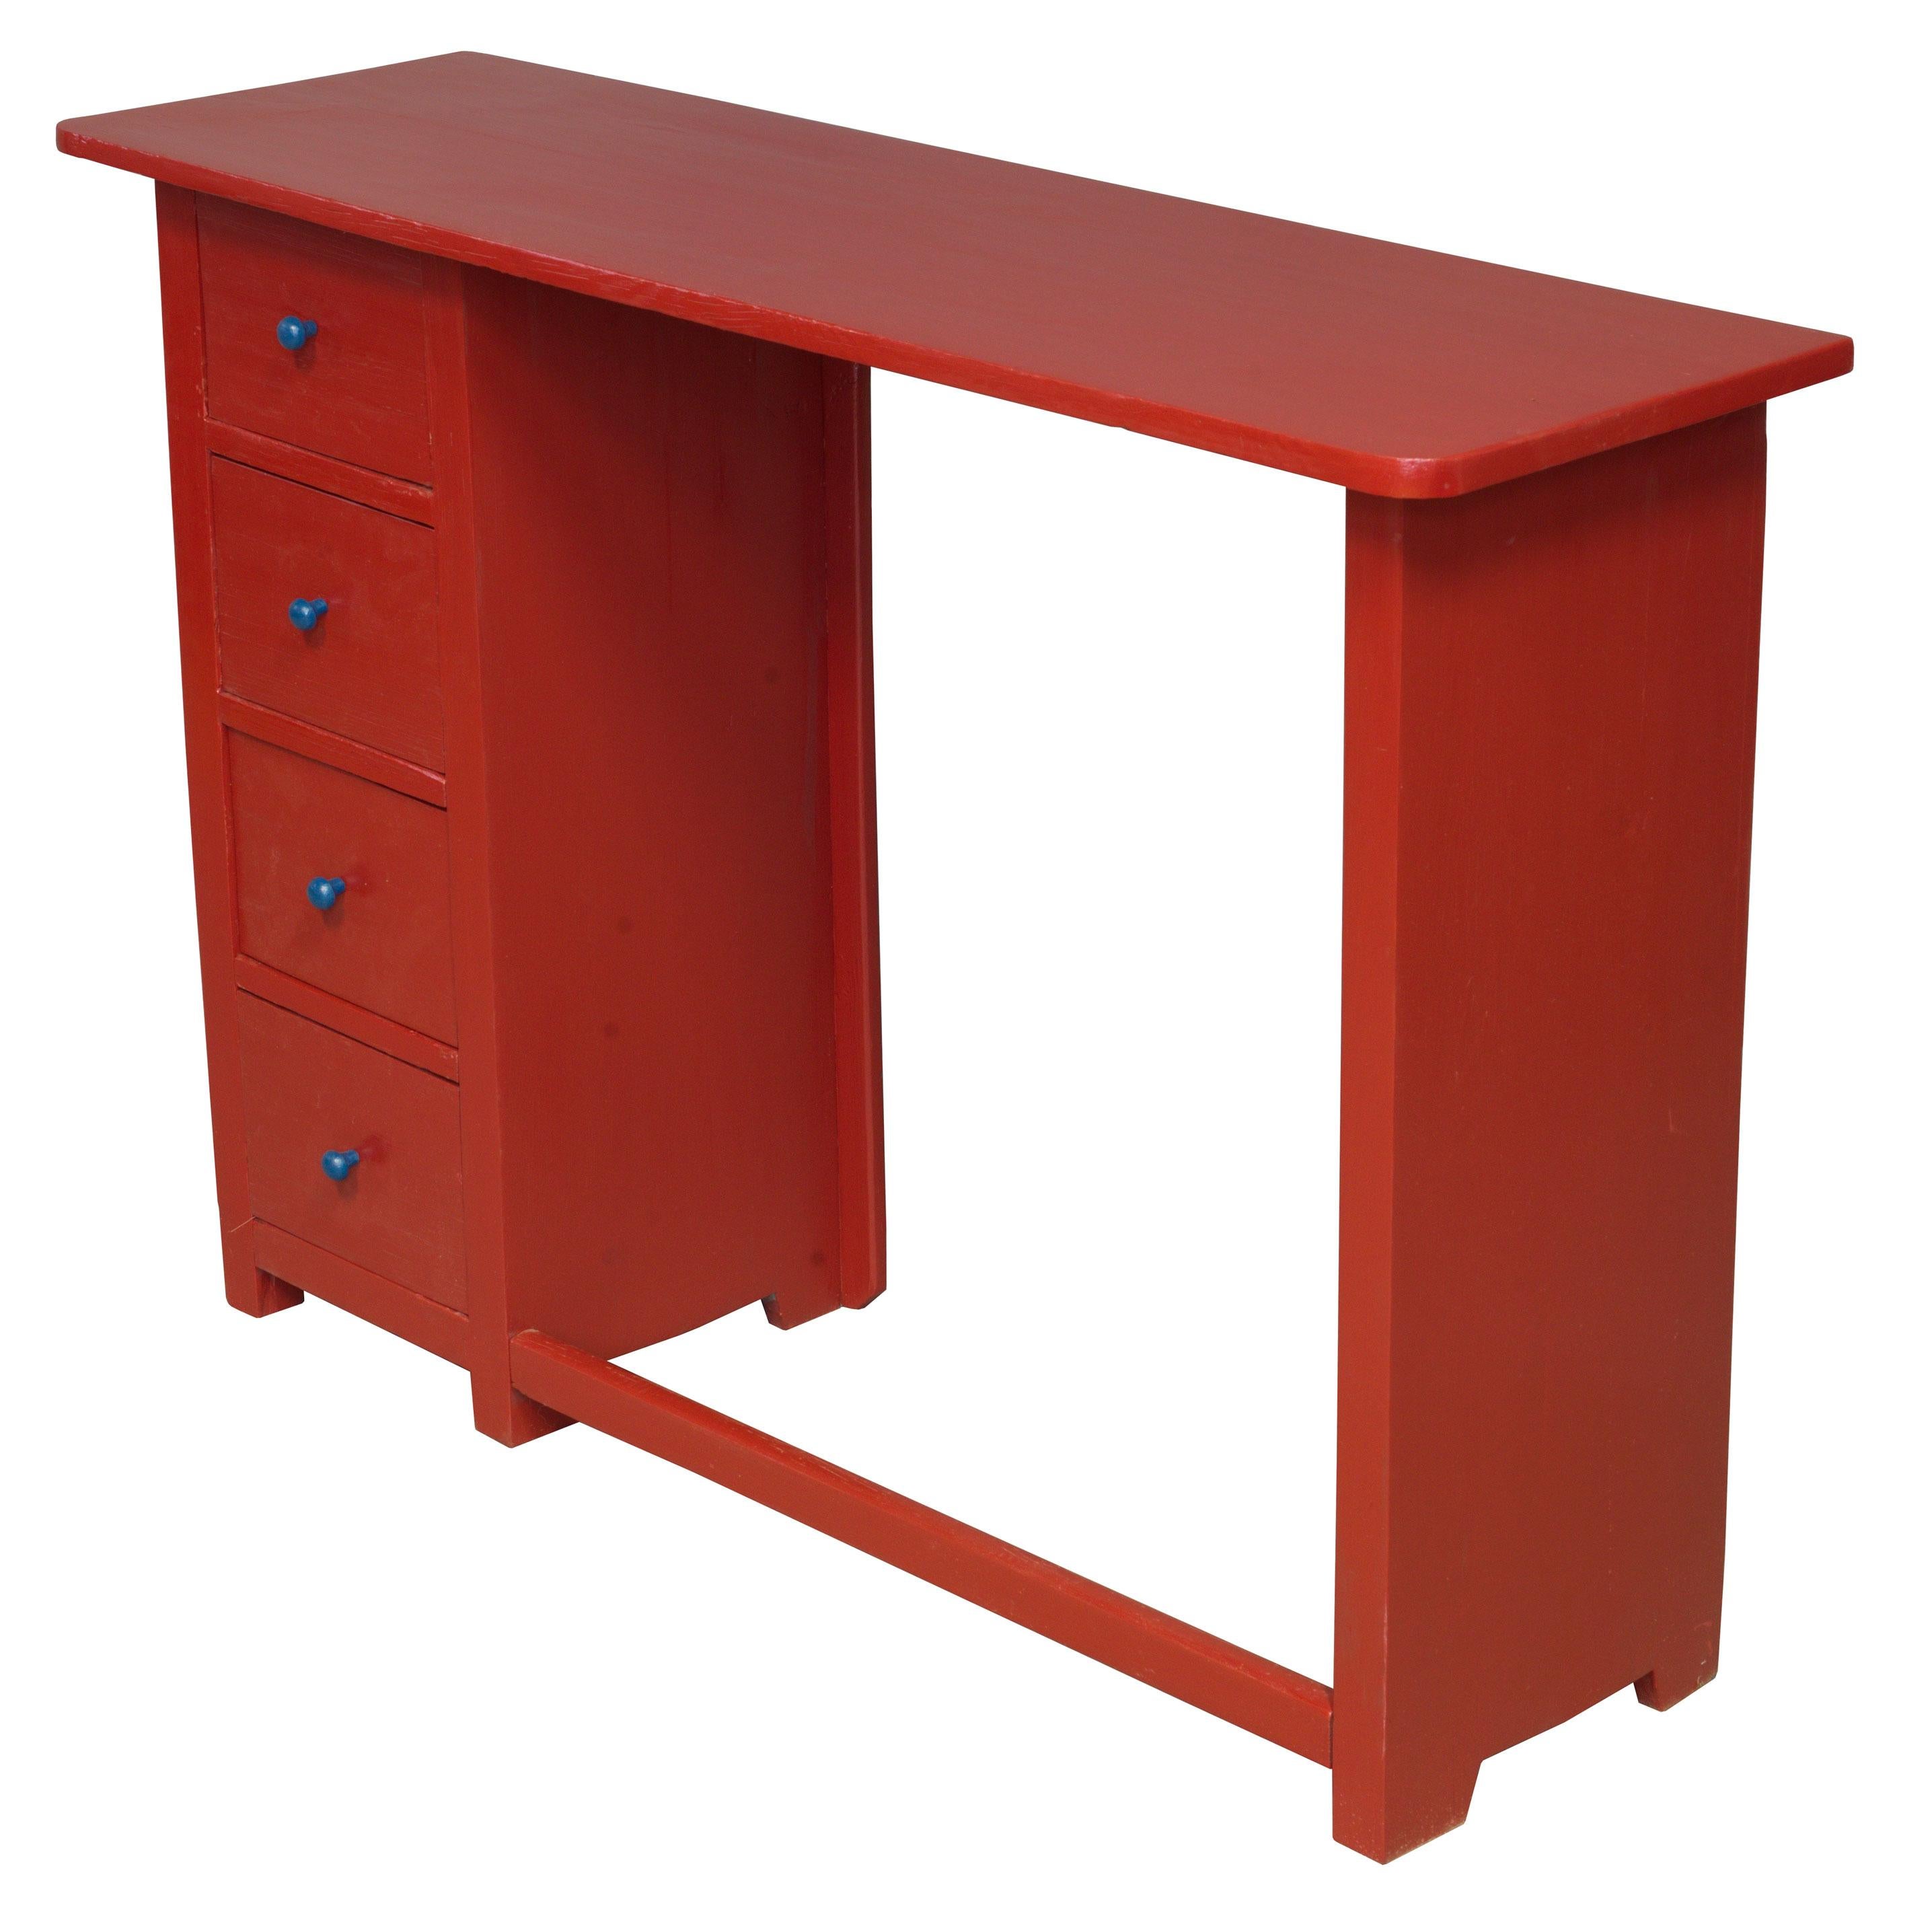 Czech 1920's Red and Blue Wooden Desk For Sale